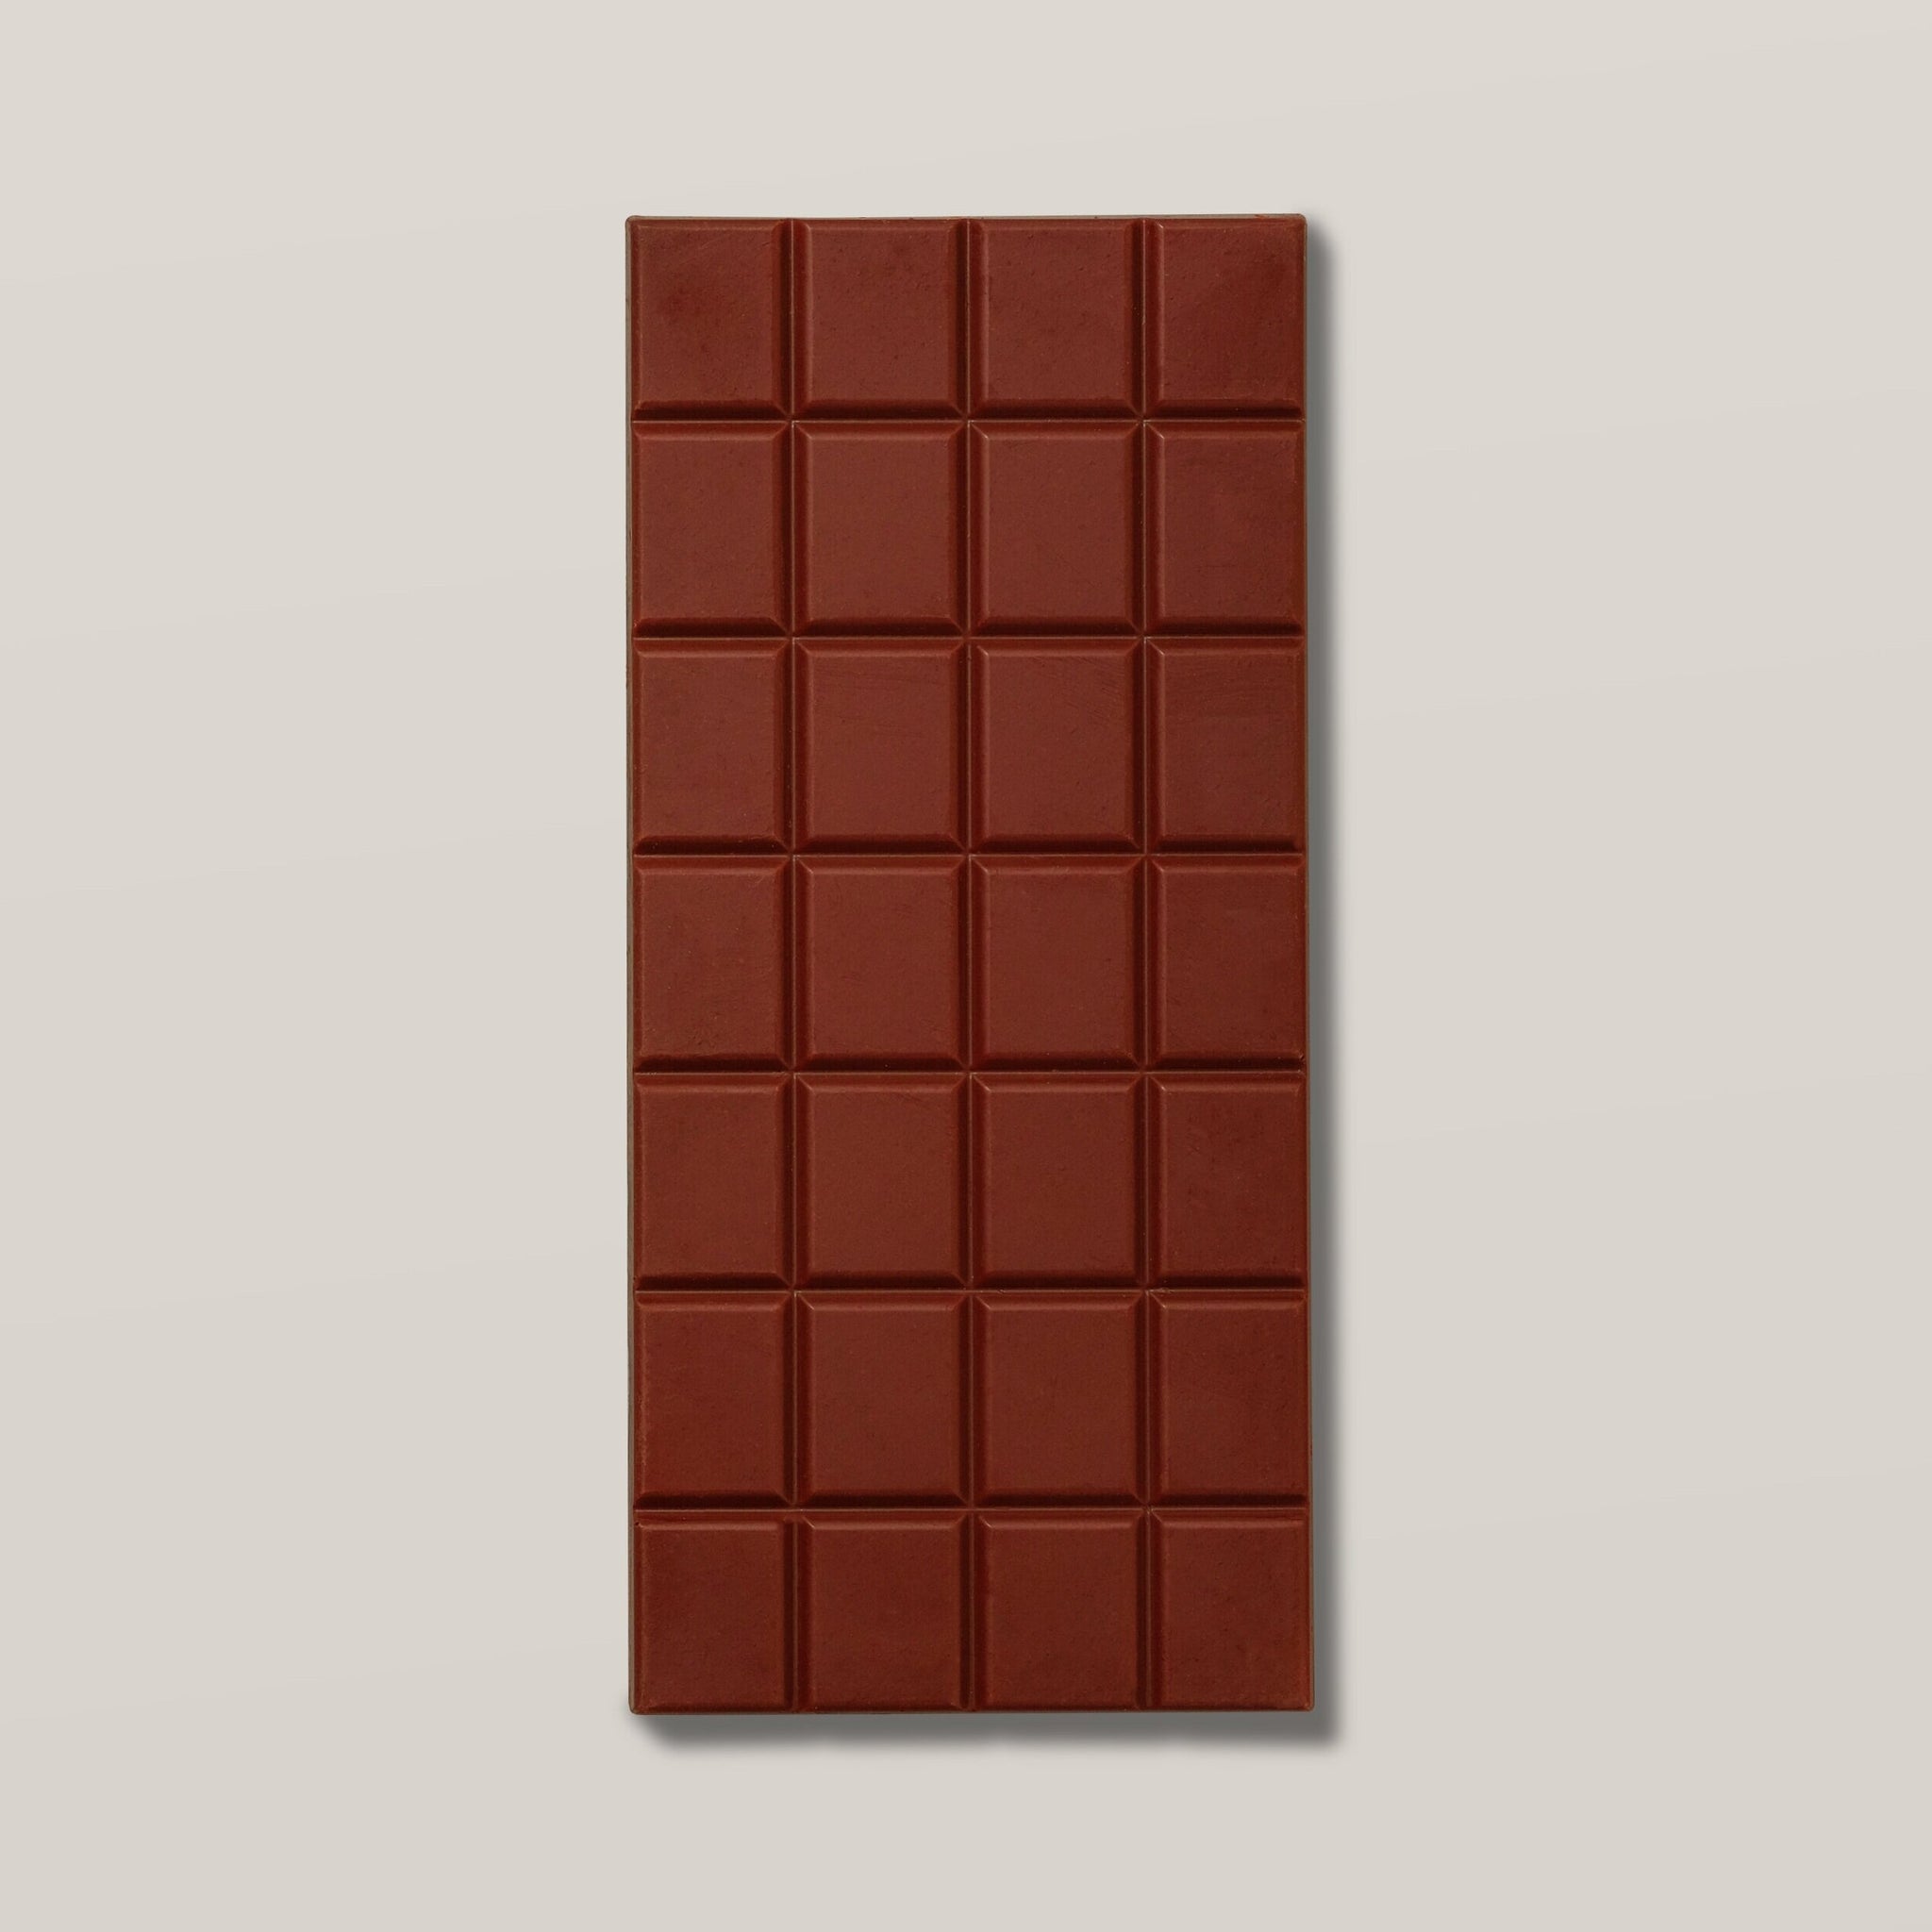 MAST - CLASSIC CHOCOLATE BAR IN ALMOND BUTTER